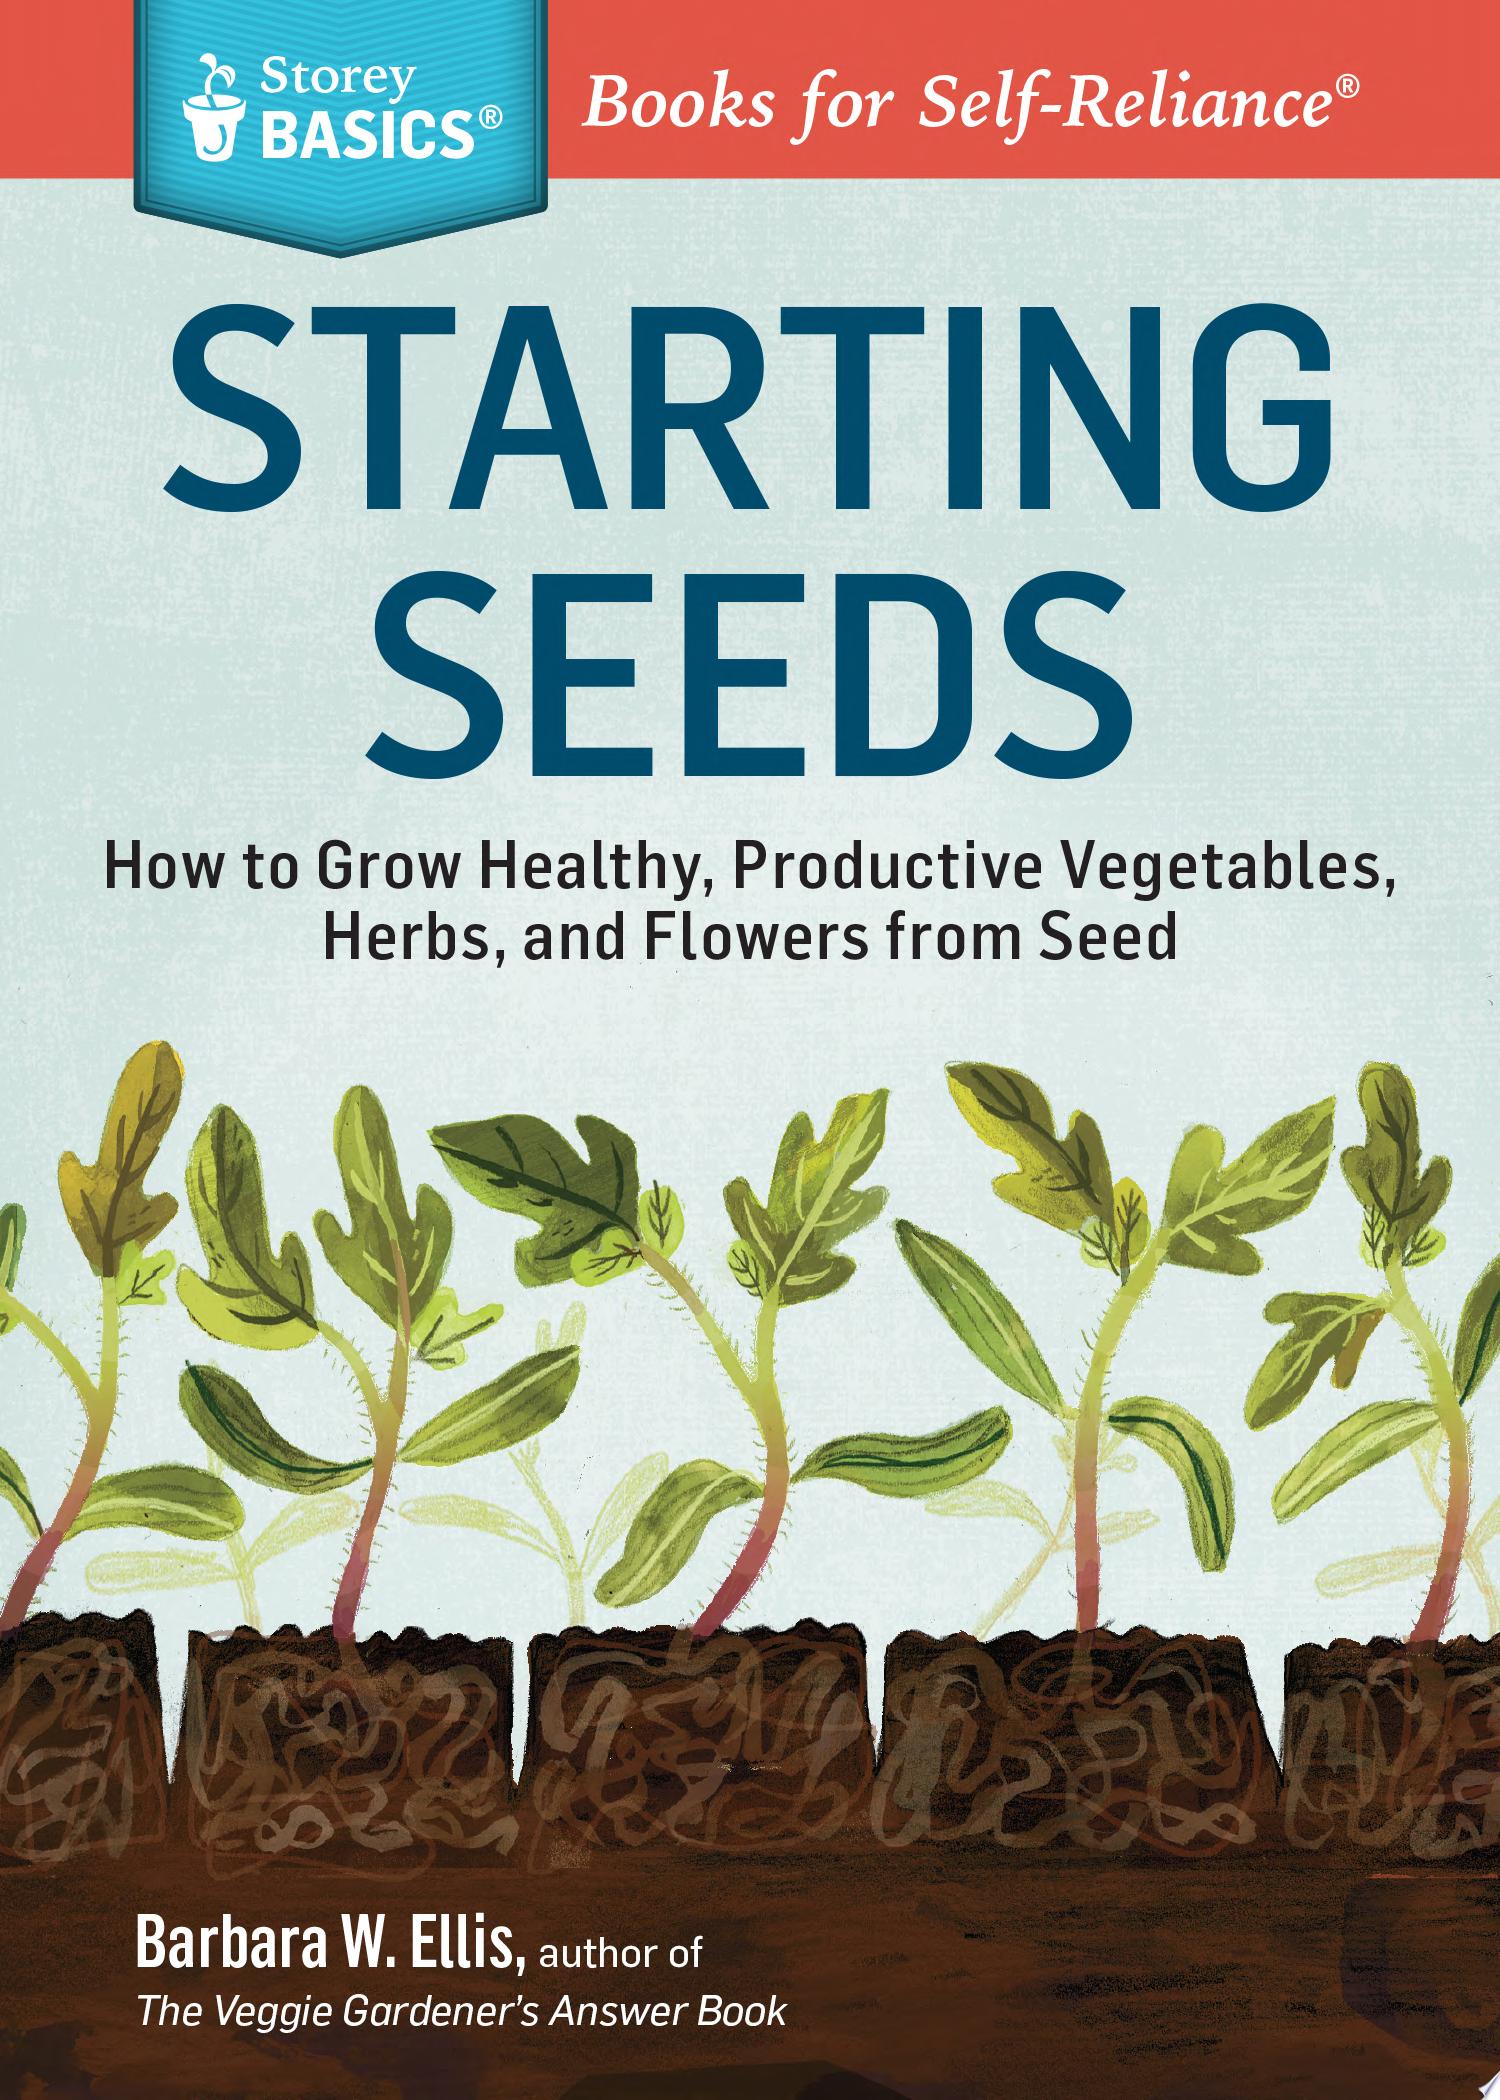 Image for "Starting Seeds"